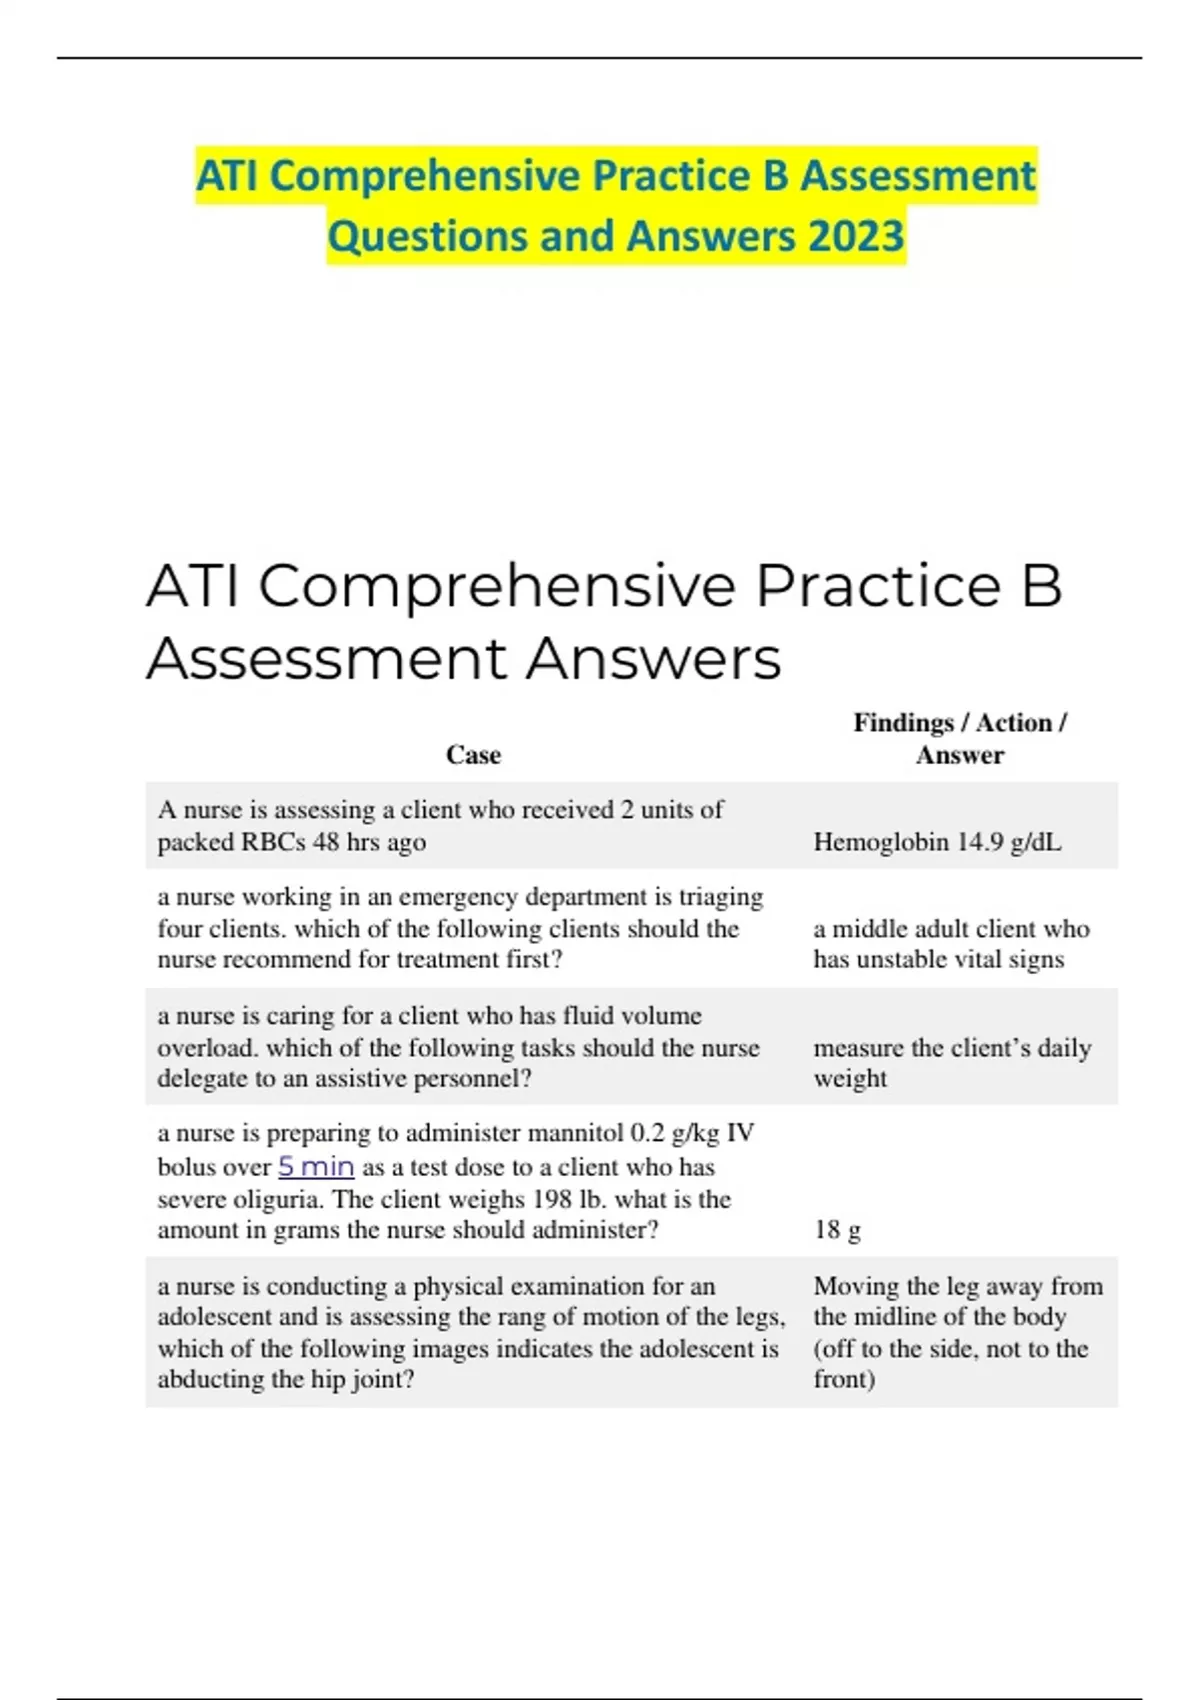 ATI Comprehensive Practice B Assessment Questions and Answers 2023